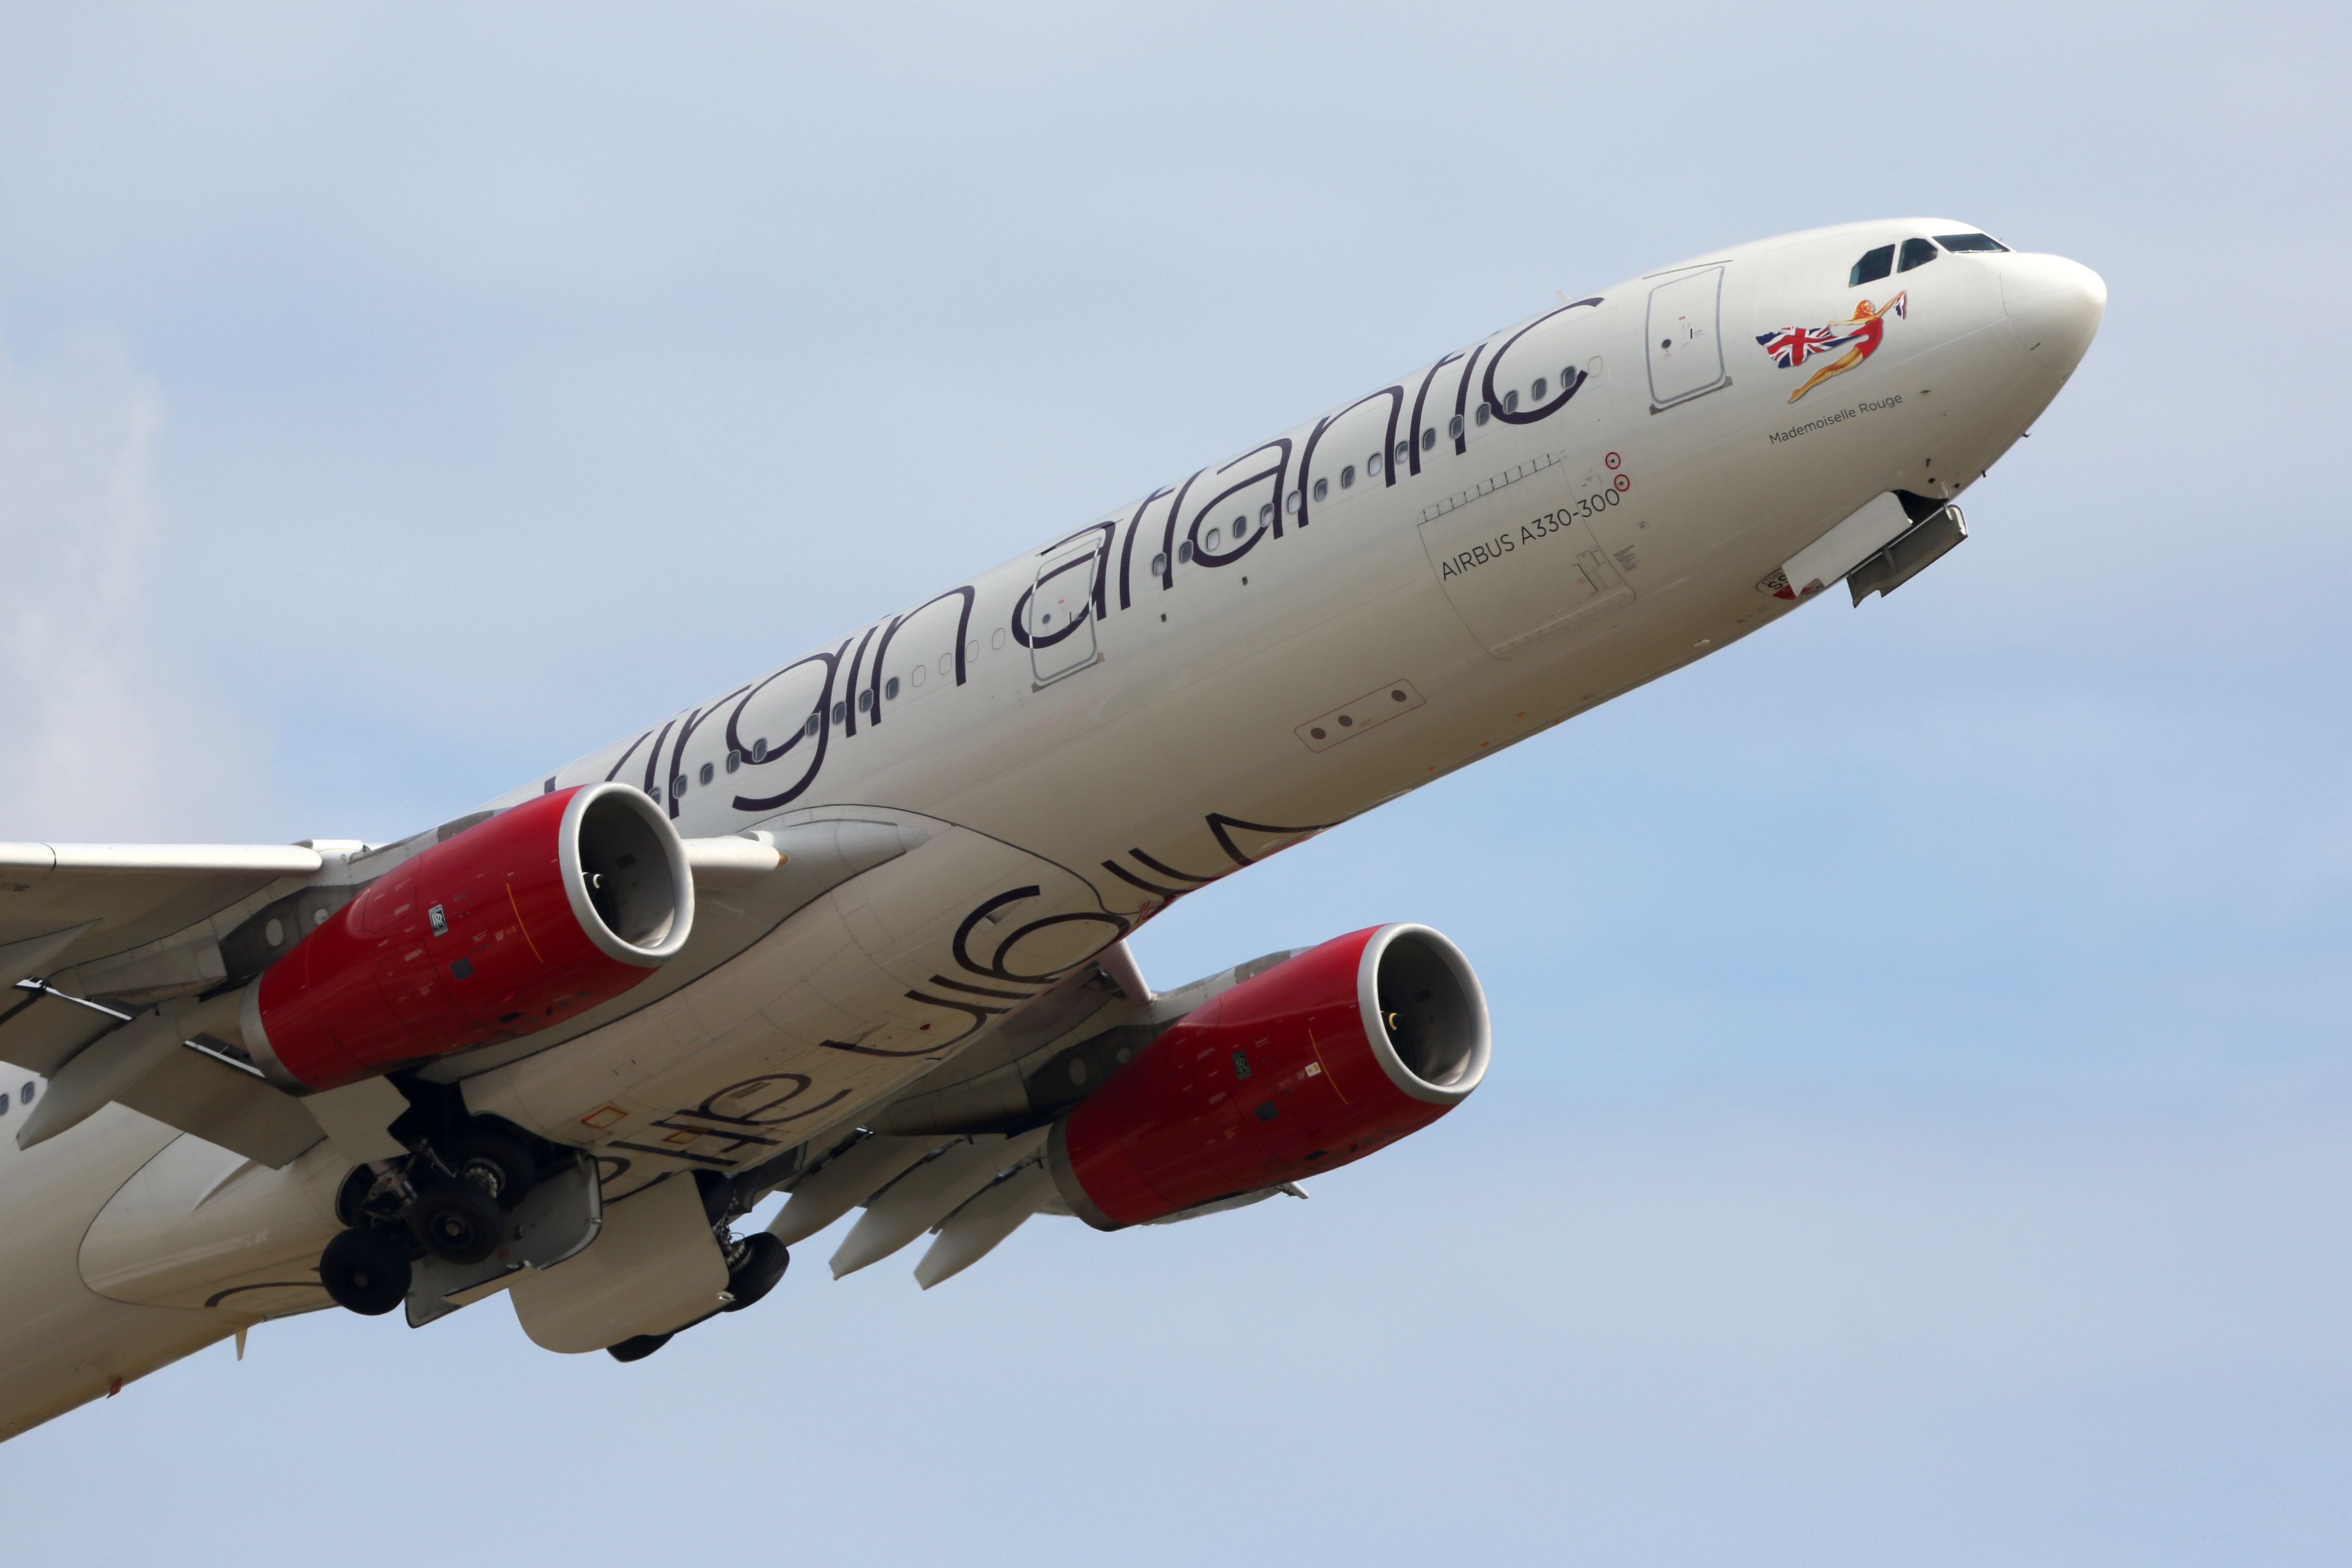 A Virgin Atlantic Airbus A330-300 flying in the sky.